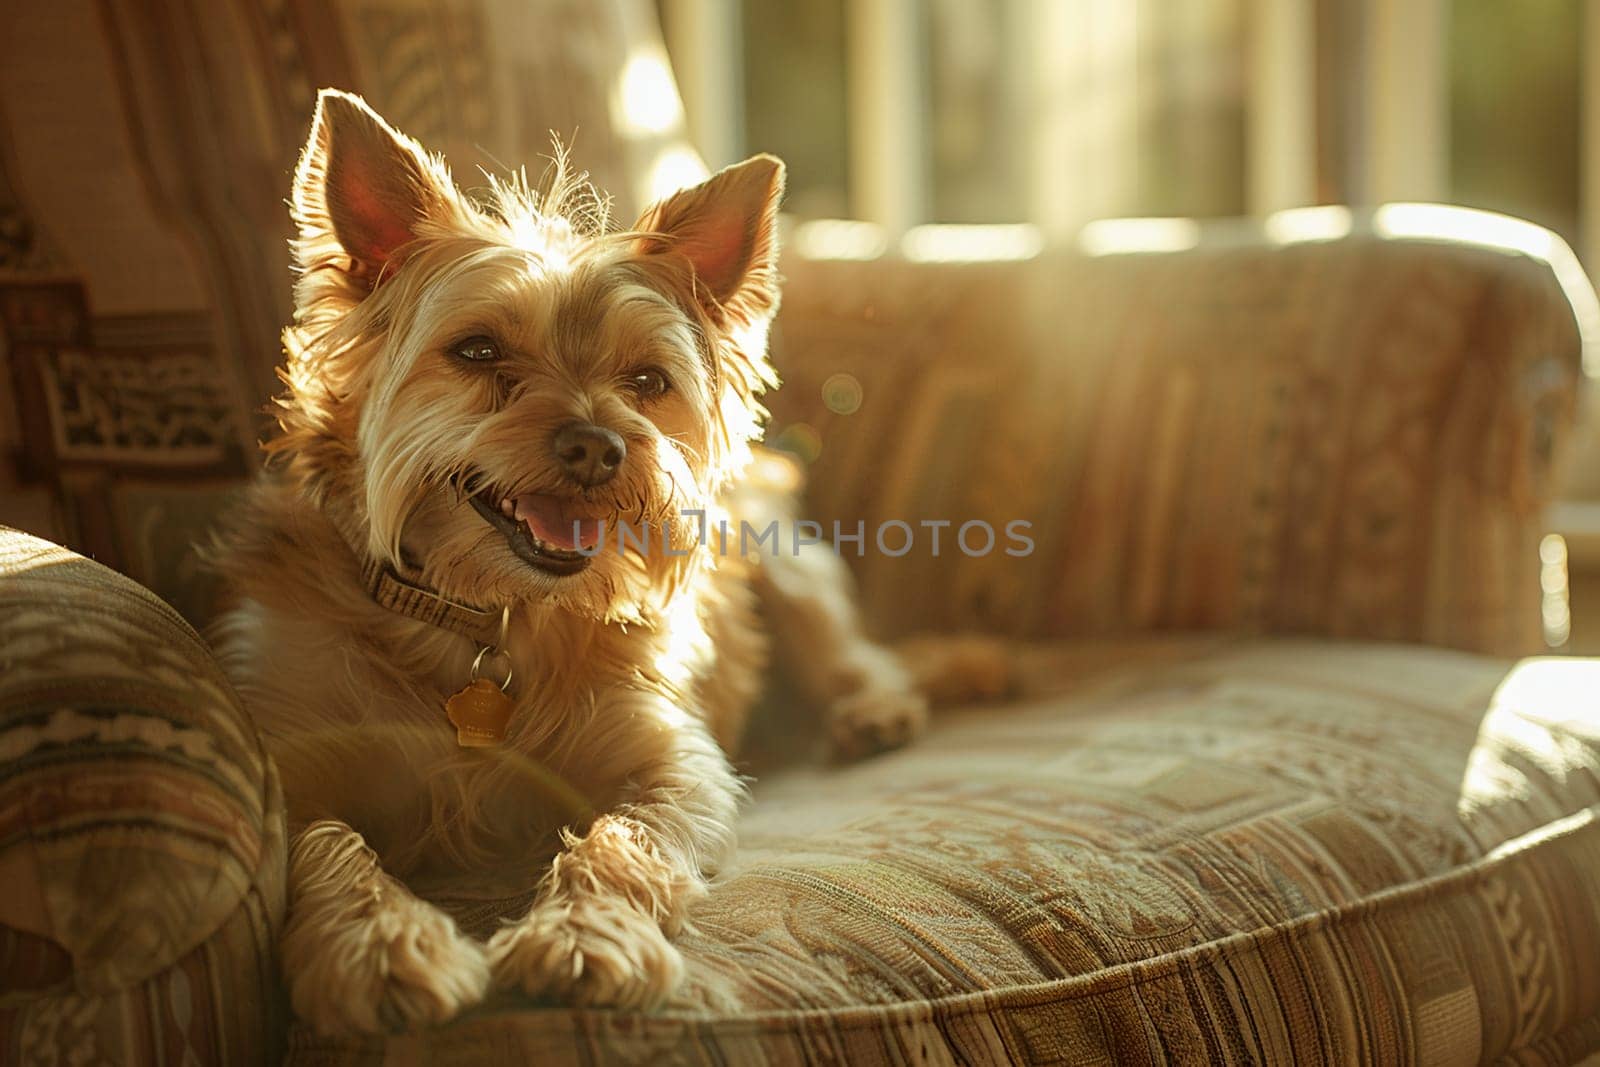 Relaxed Yorkshire terrier lying contentedly on luxury chair during golden hour. Serene pet scene captures warmth, comfort of home life.